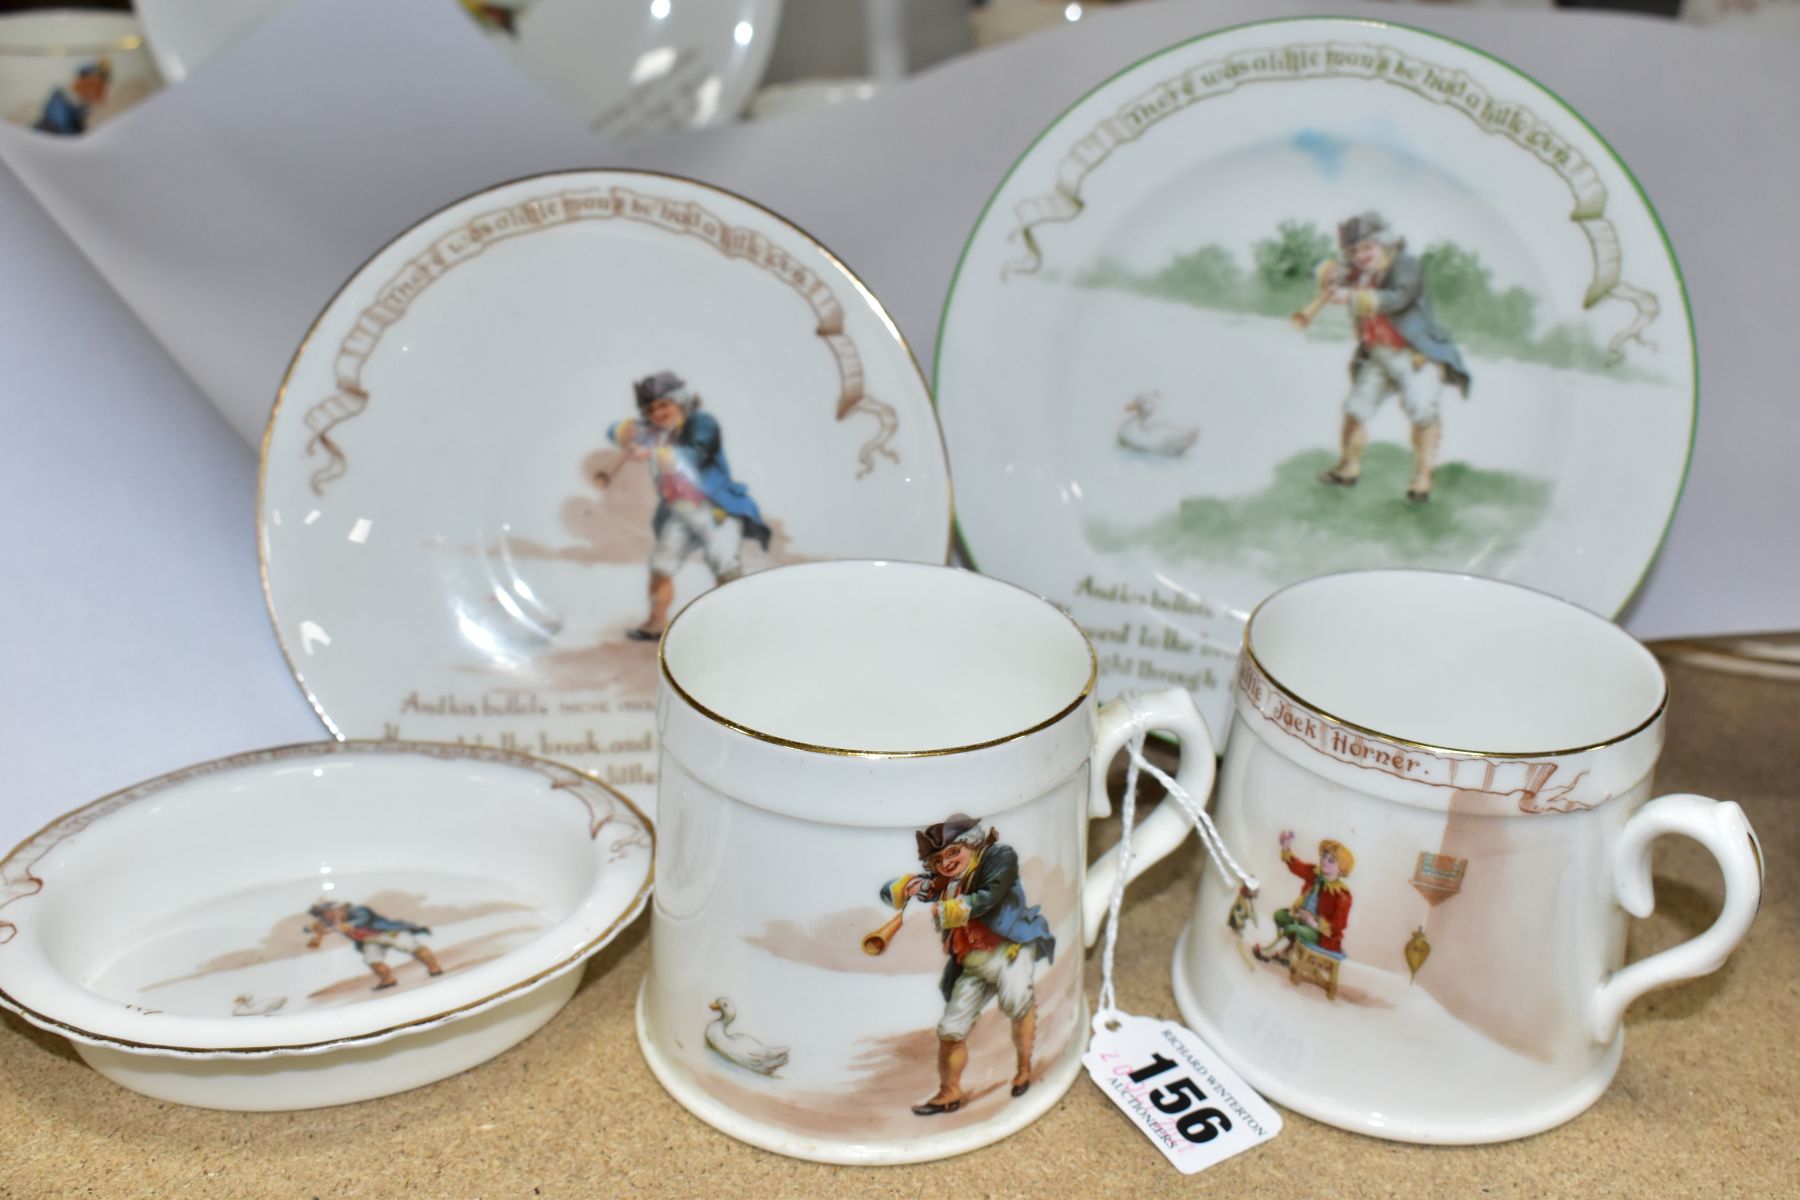 FOUR PIECES OF ROYAL DOULTON NURSERY RHYMES 'A' SERIES WARE, DESIGNED BY WILLIAM SAVAGE COOPER, '